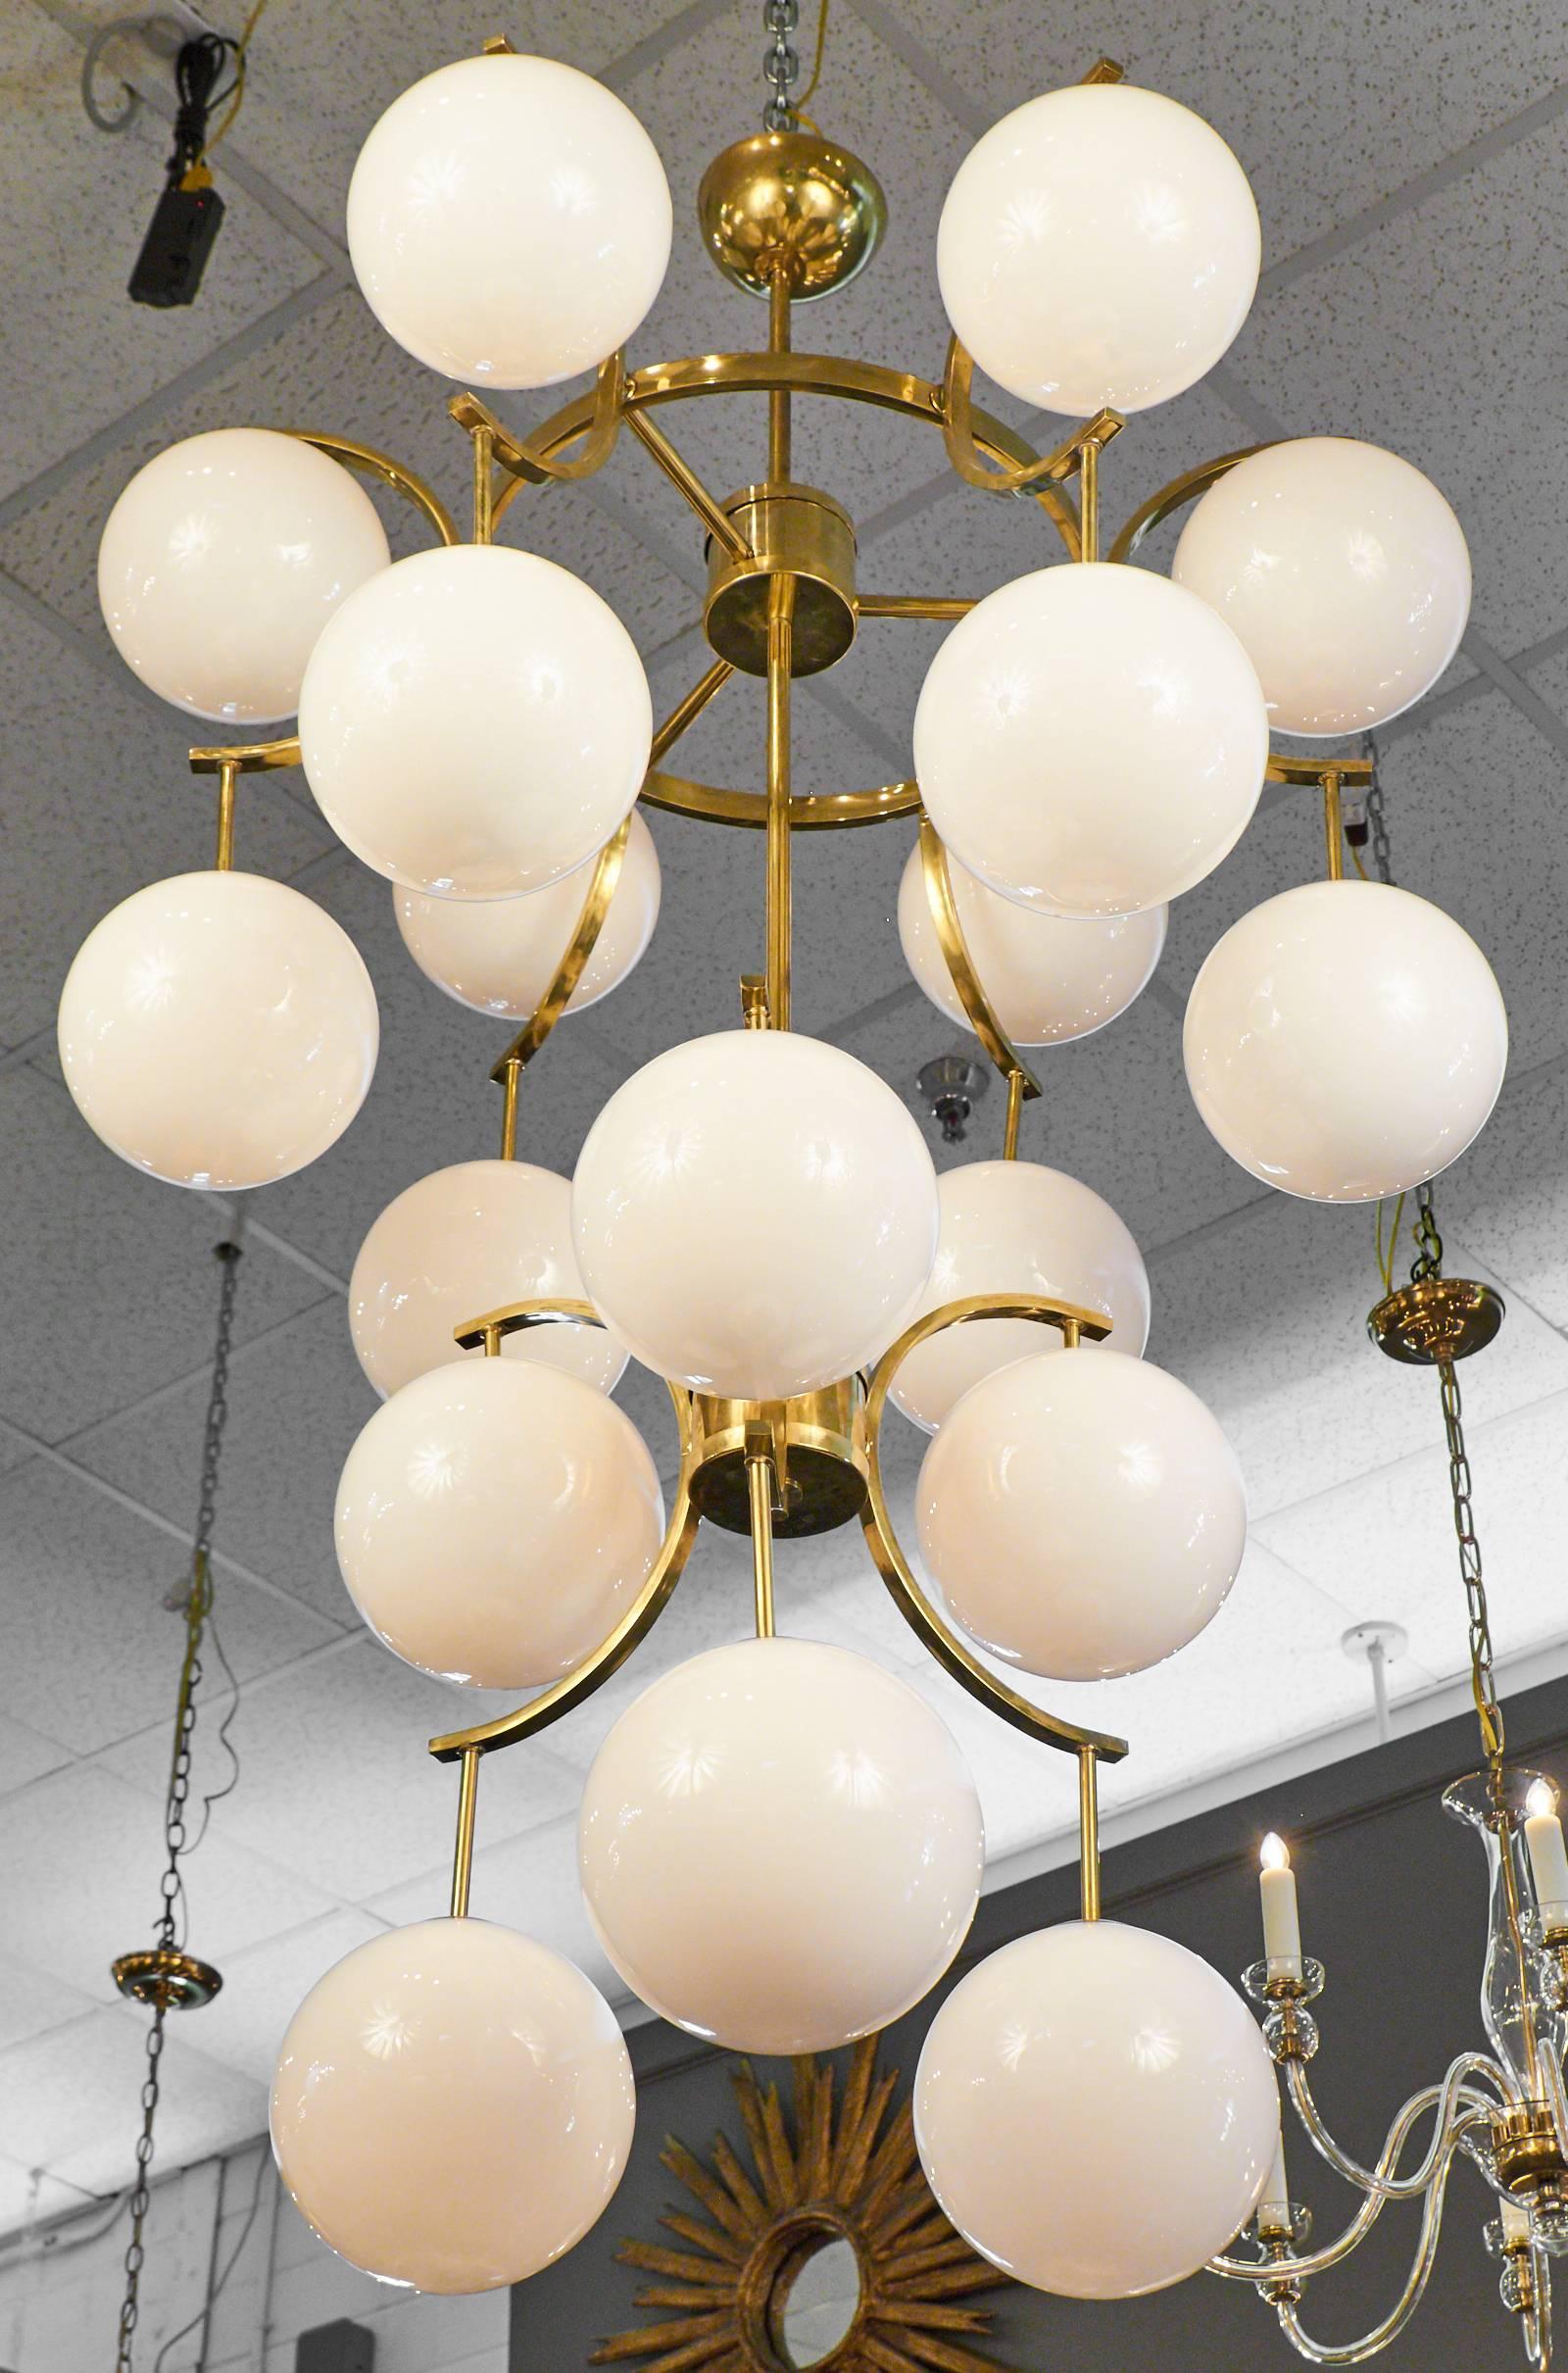 18 white Murano glass globes Cascade down a Mid-Century Modern style brass structure on this wondrous chandelier. Rewired for the US to hold 18 medium-base light bulbs.

This fixture is currently located at our dealer's warehouse in Italy. Please